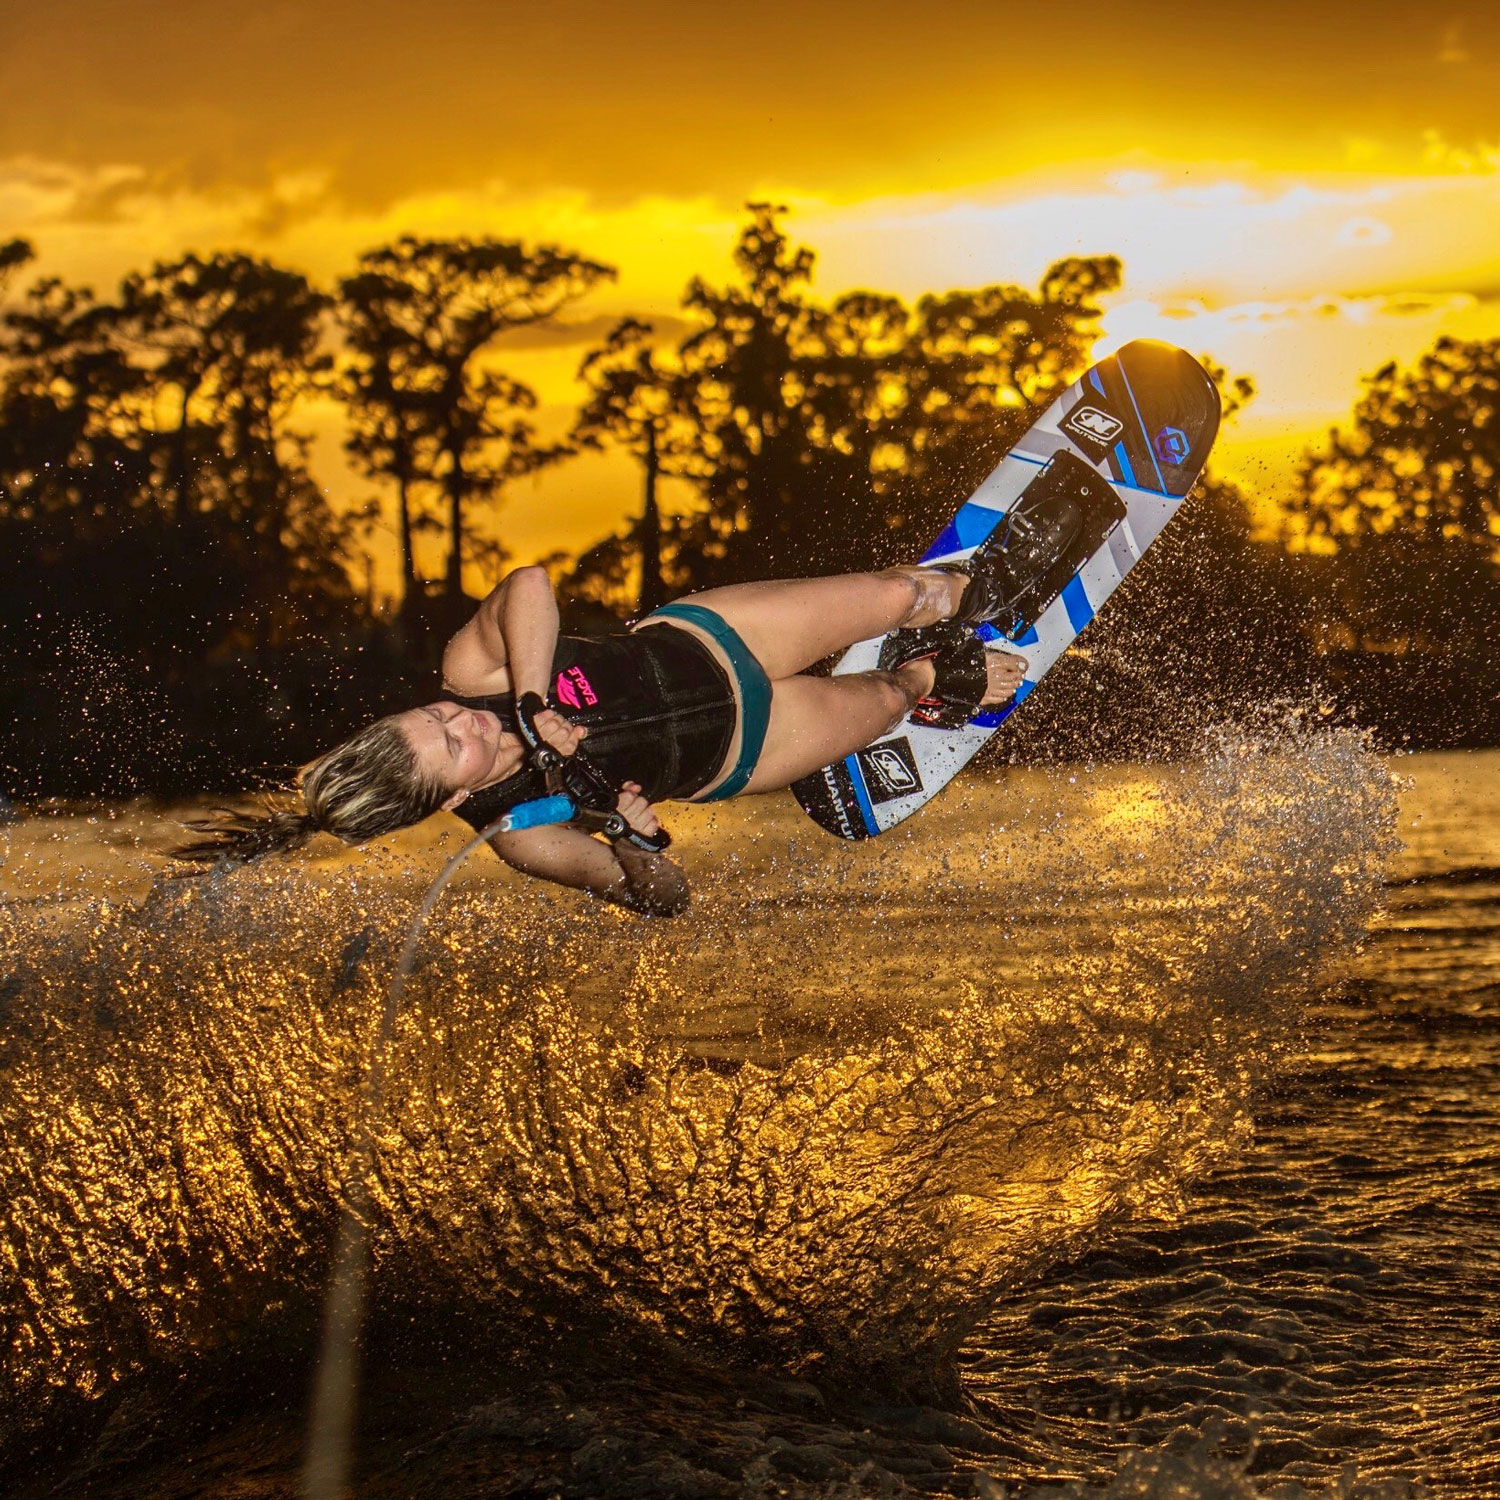 Anna Gay performing a trick on her water skis